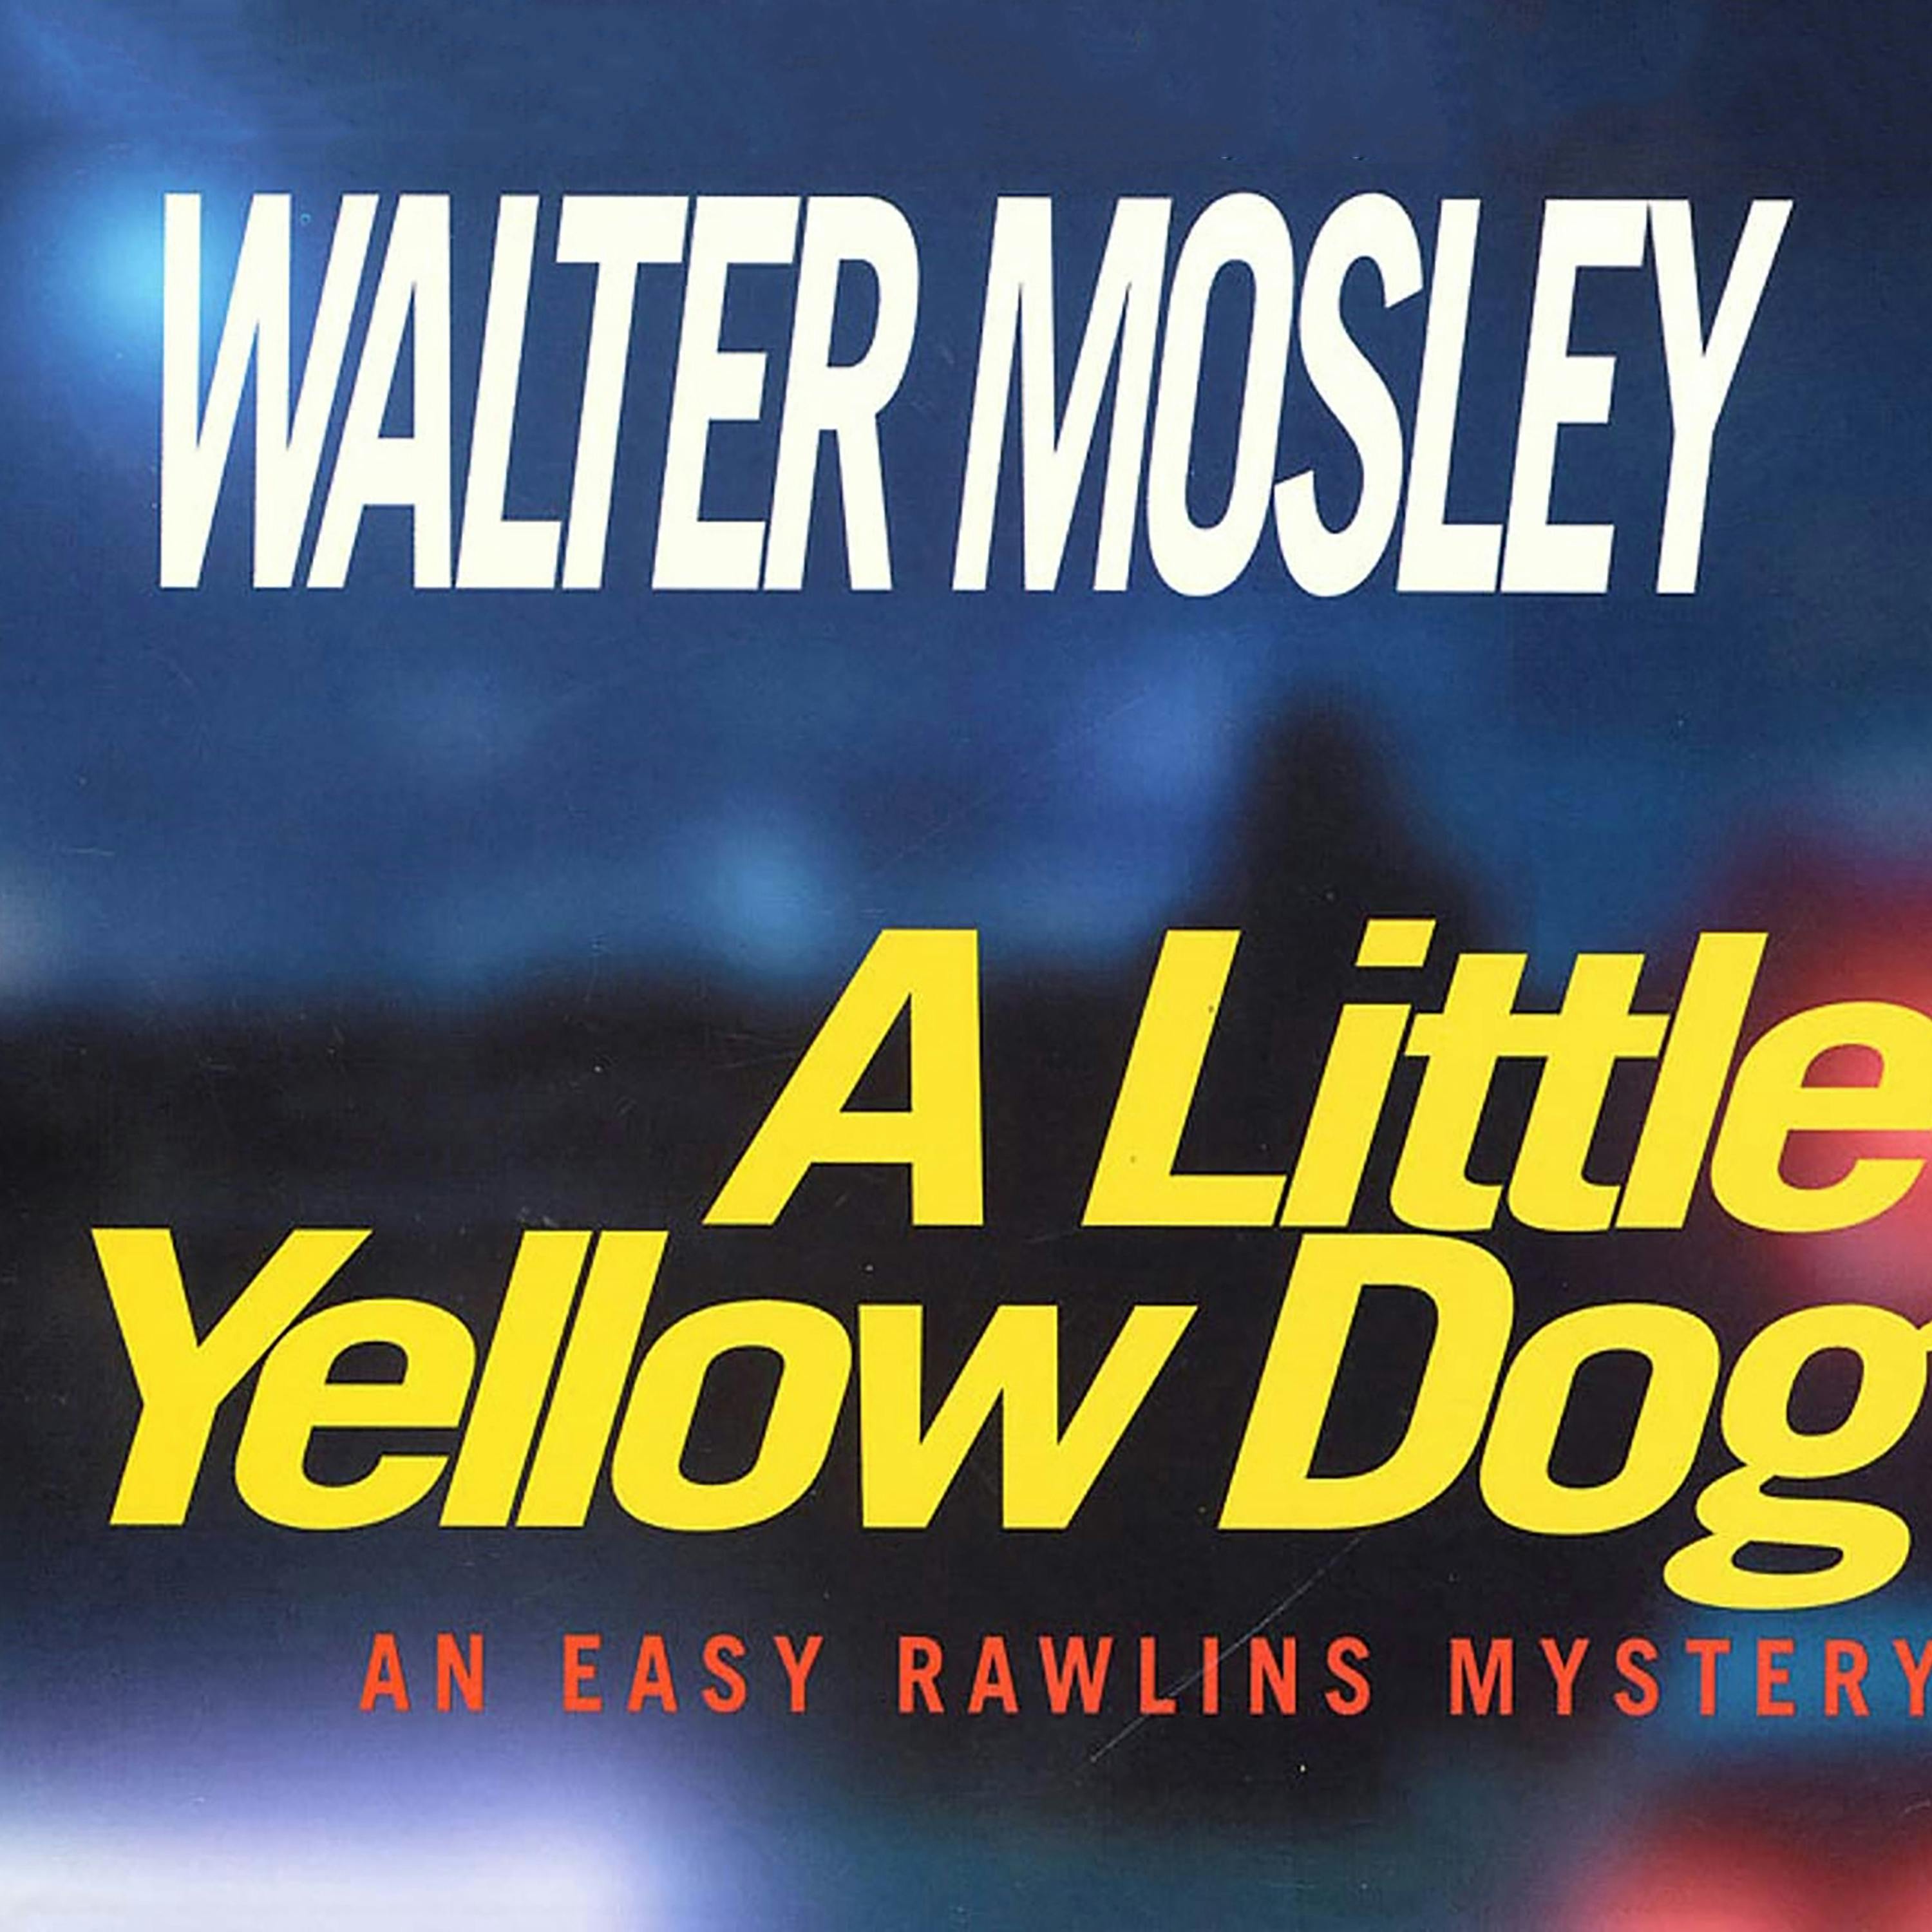 Image of A Little Yellow Dog